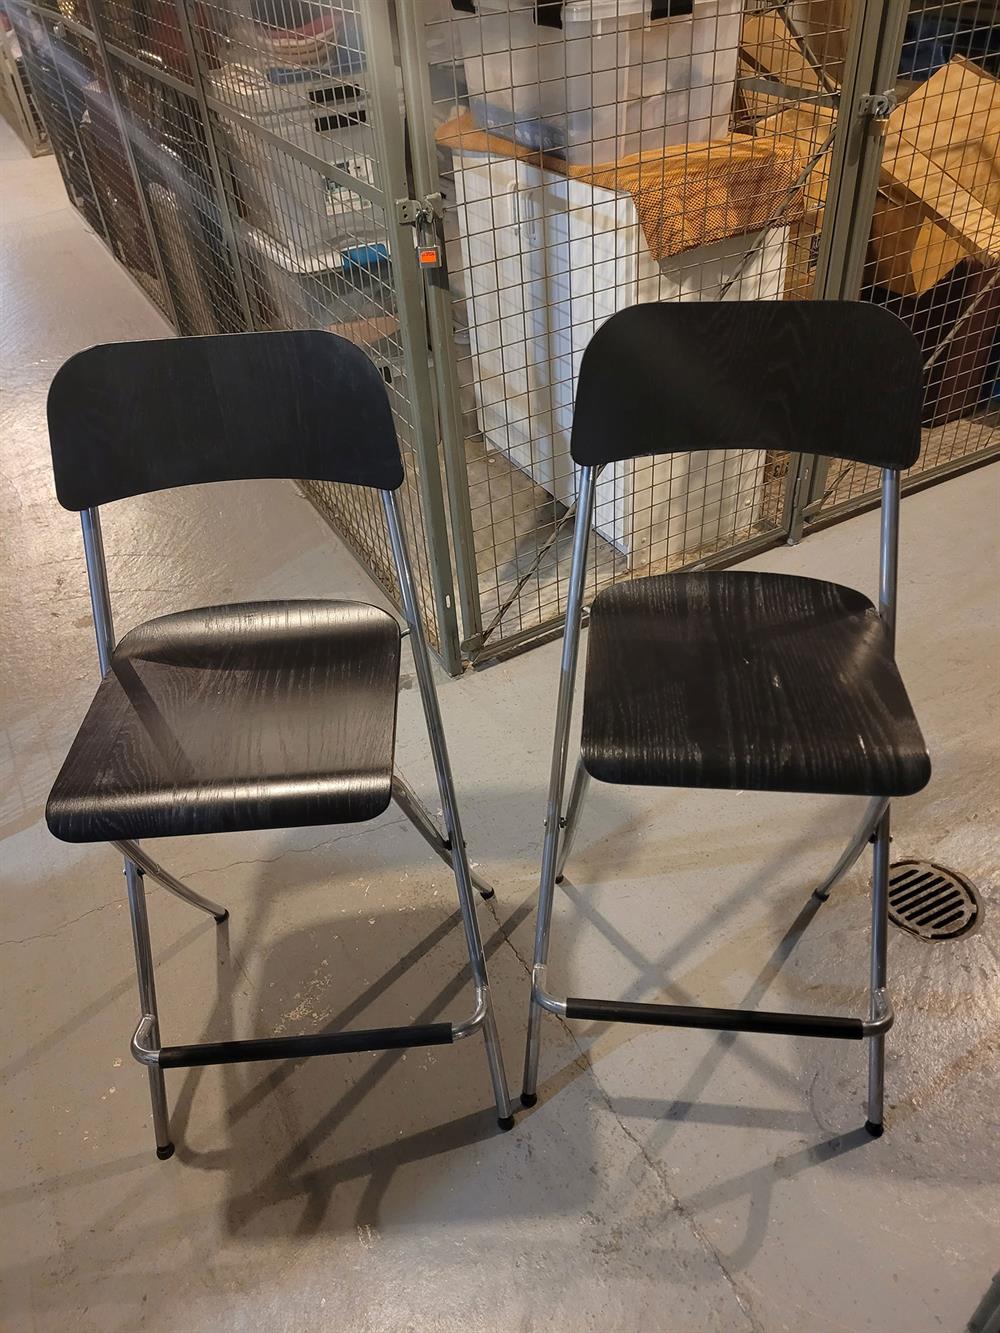 $40 - Set of 2 ikea stool high chair with back rest plus one free chair